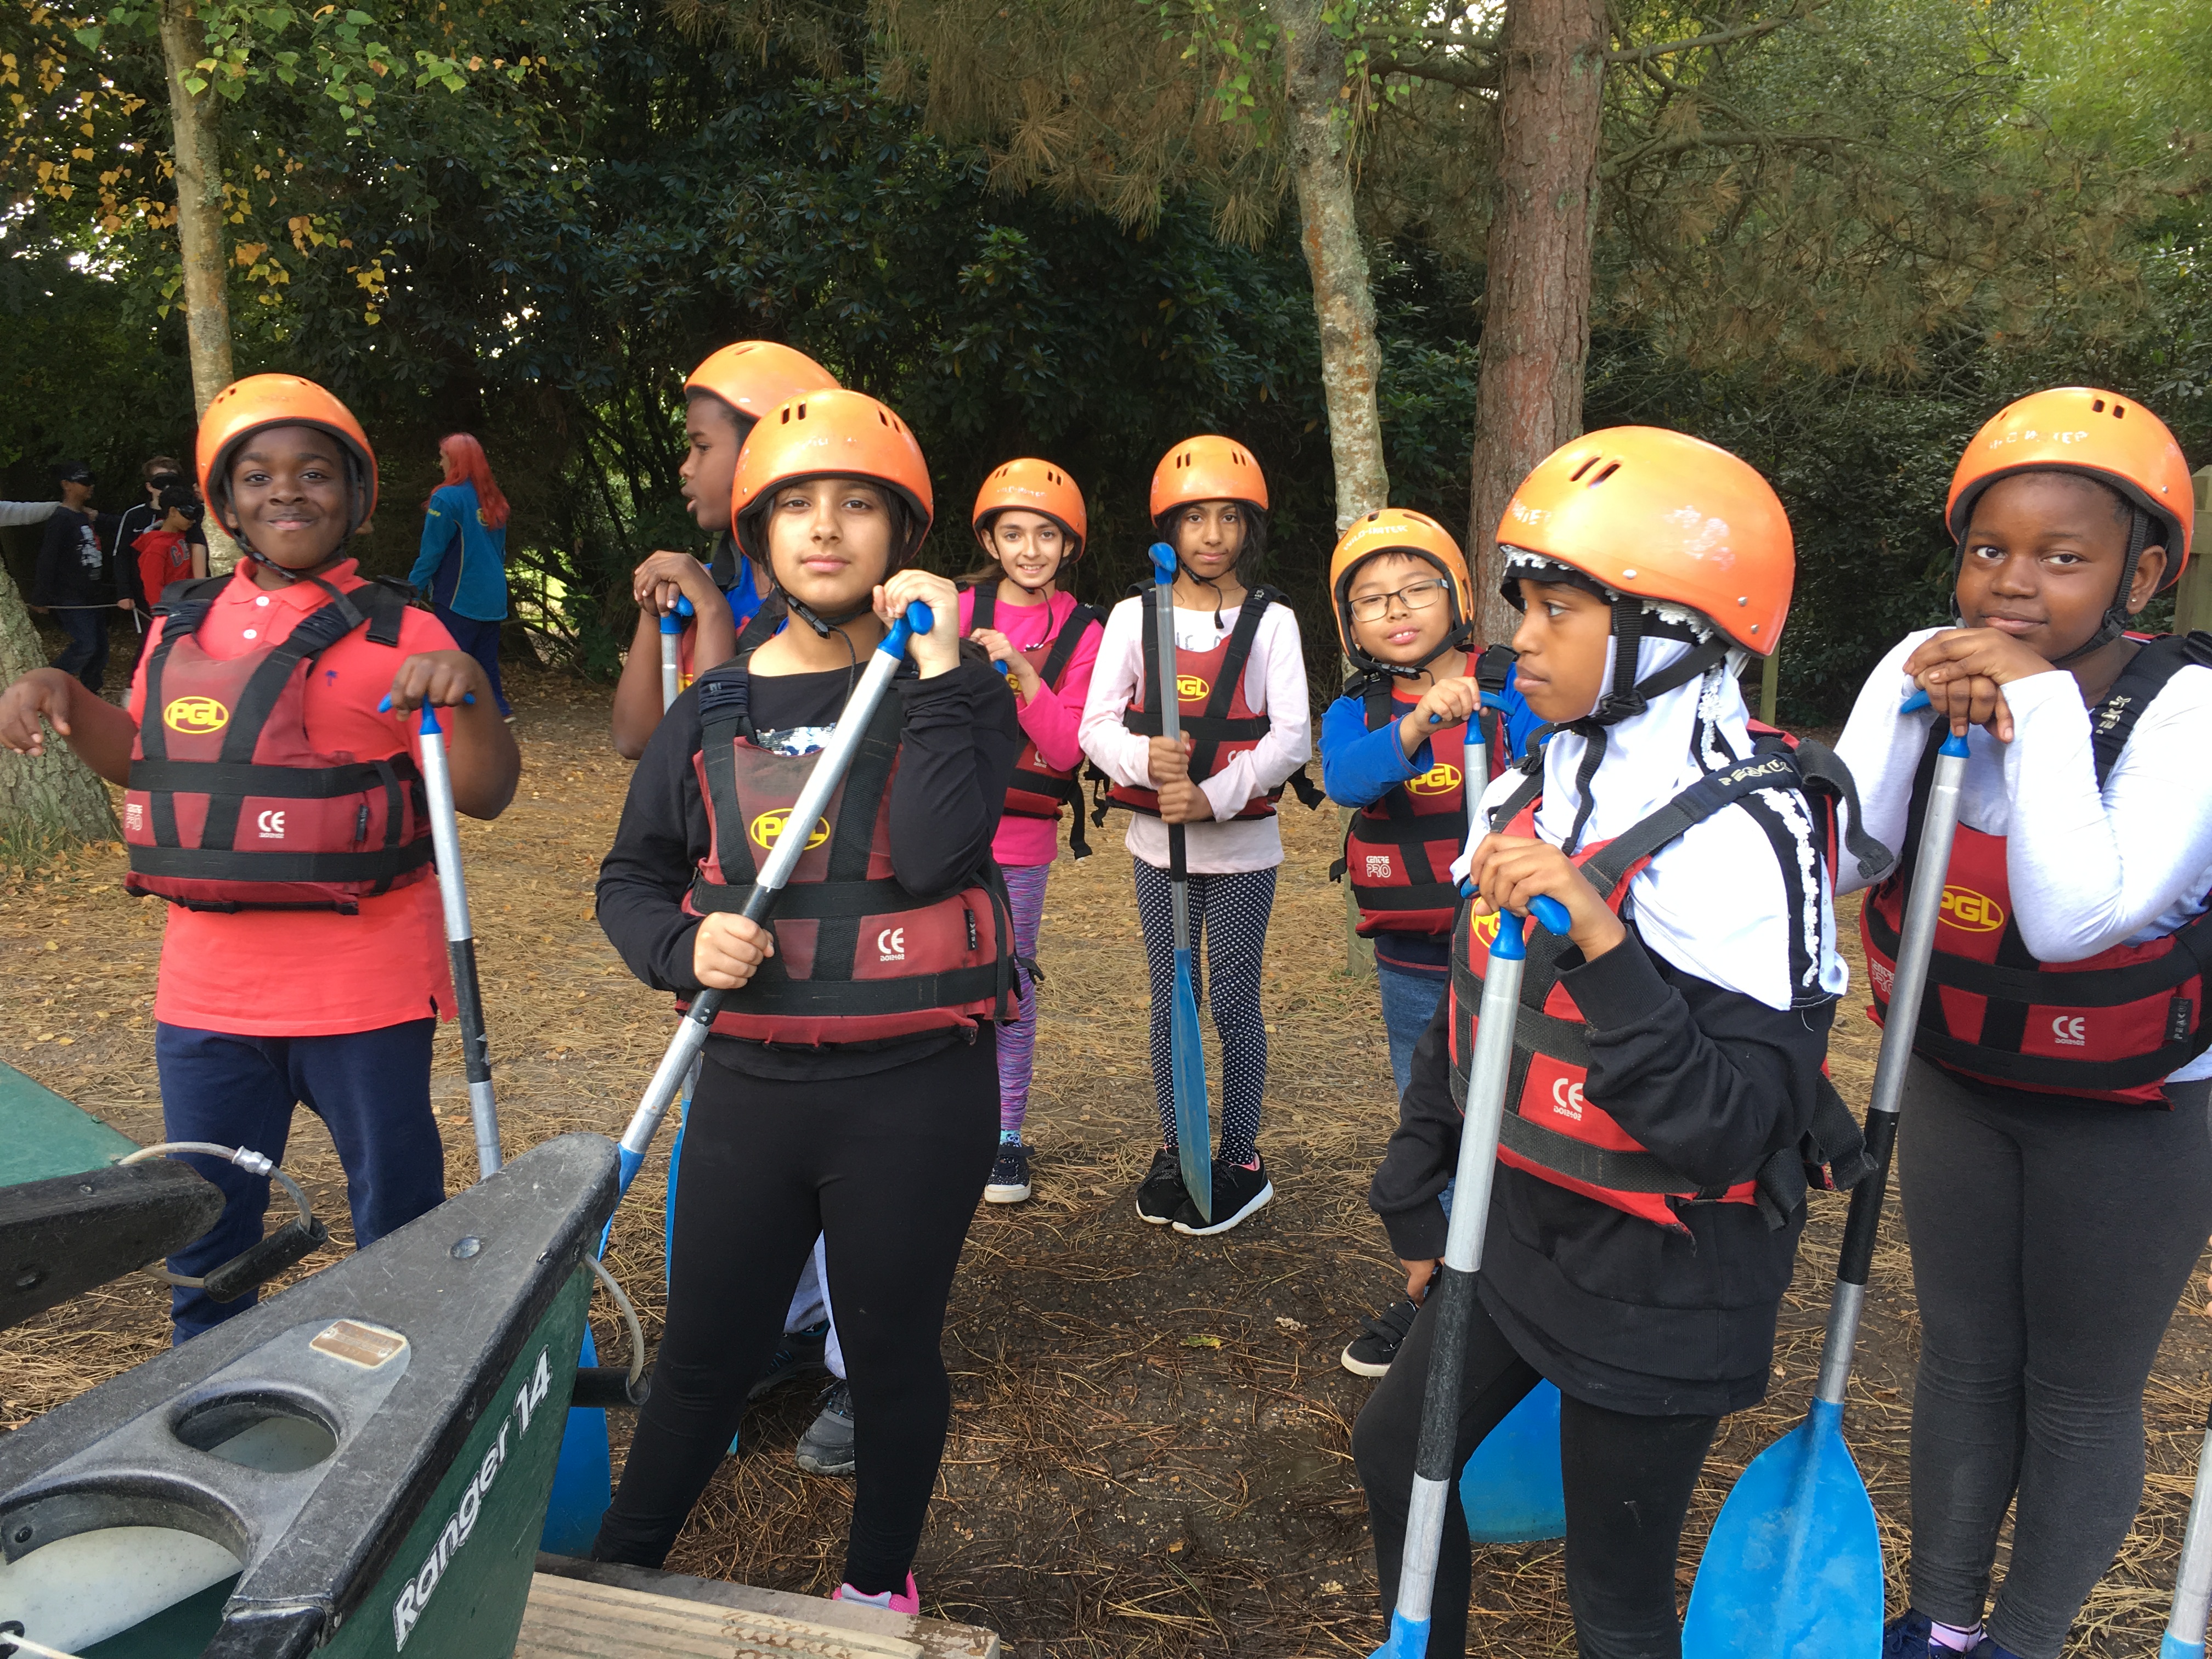 Image of a group of Year 6 children wearing hard hats and life jackets and standing next to canoes outside near a wooded area